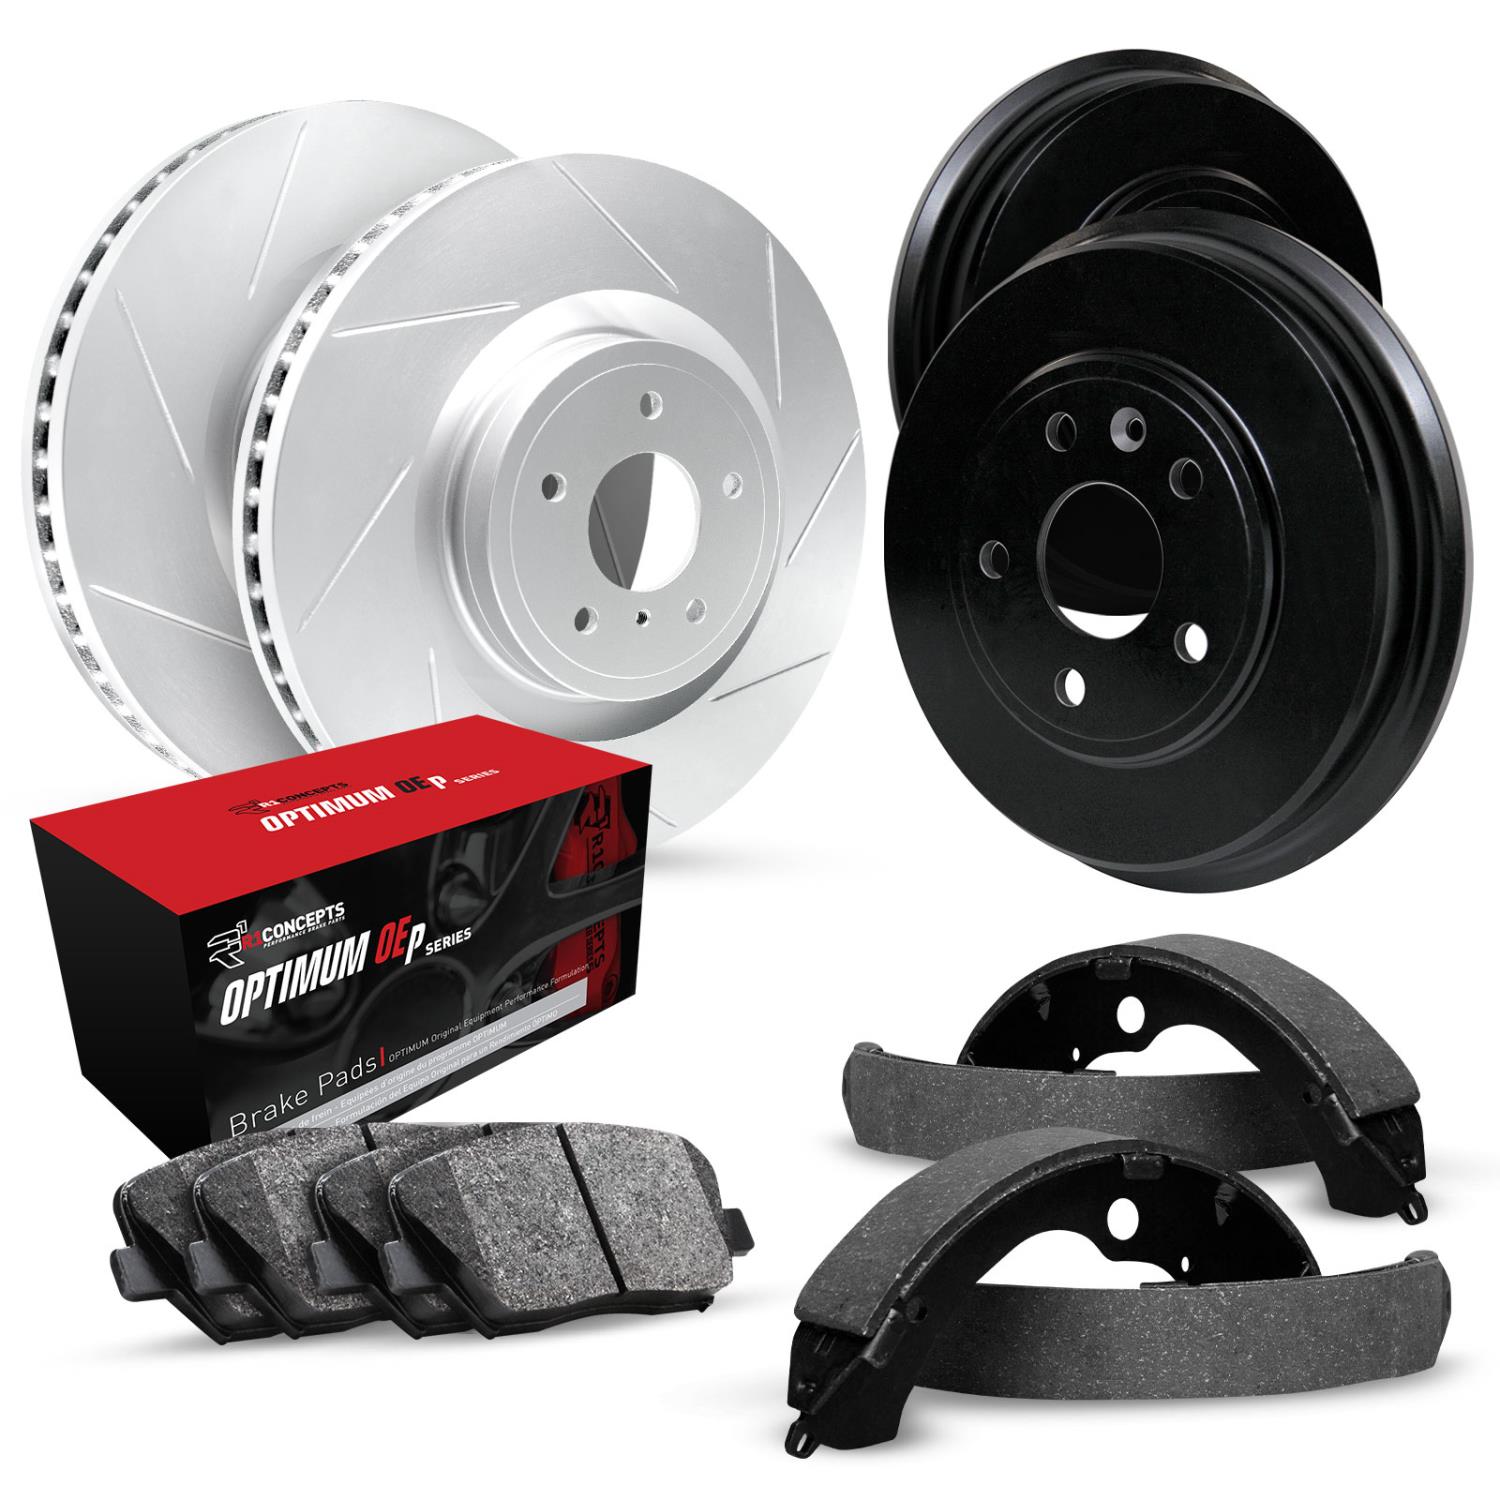 GEO-Carbon Slotted Brake Rotor & Drum Set w/Optimum OE Pads & Shoes, 1995-2001 GM, Position: Front & Rear